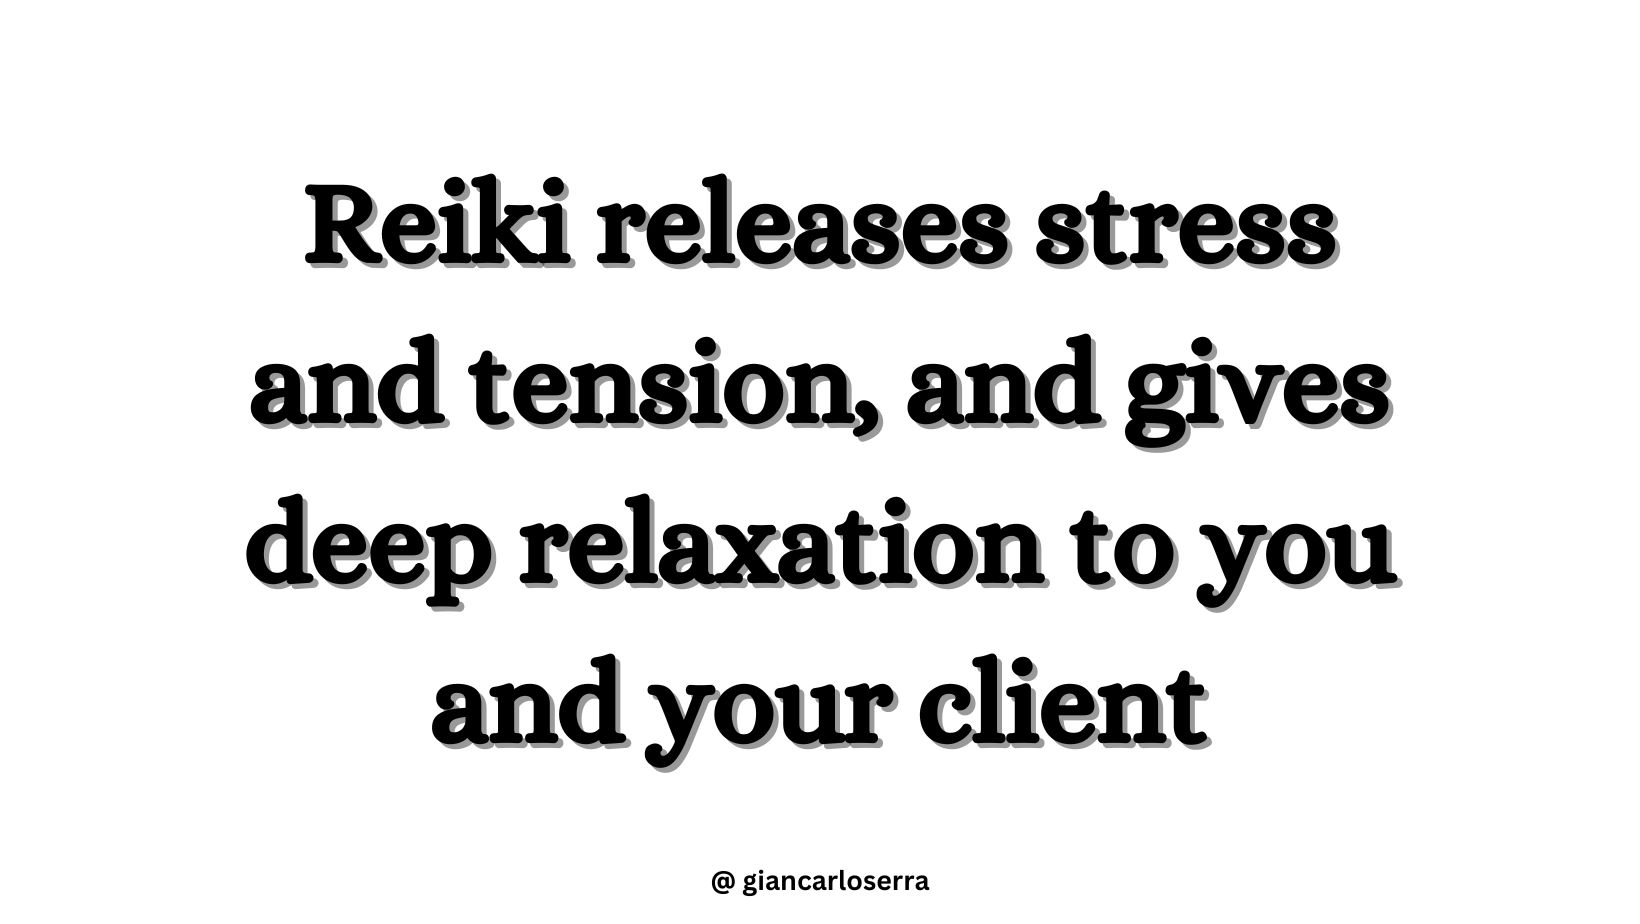 Reiki releases stress and tension